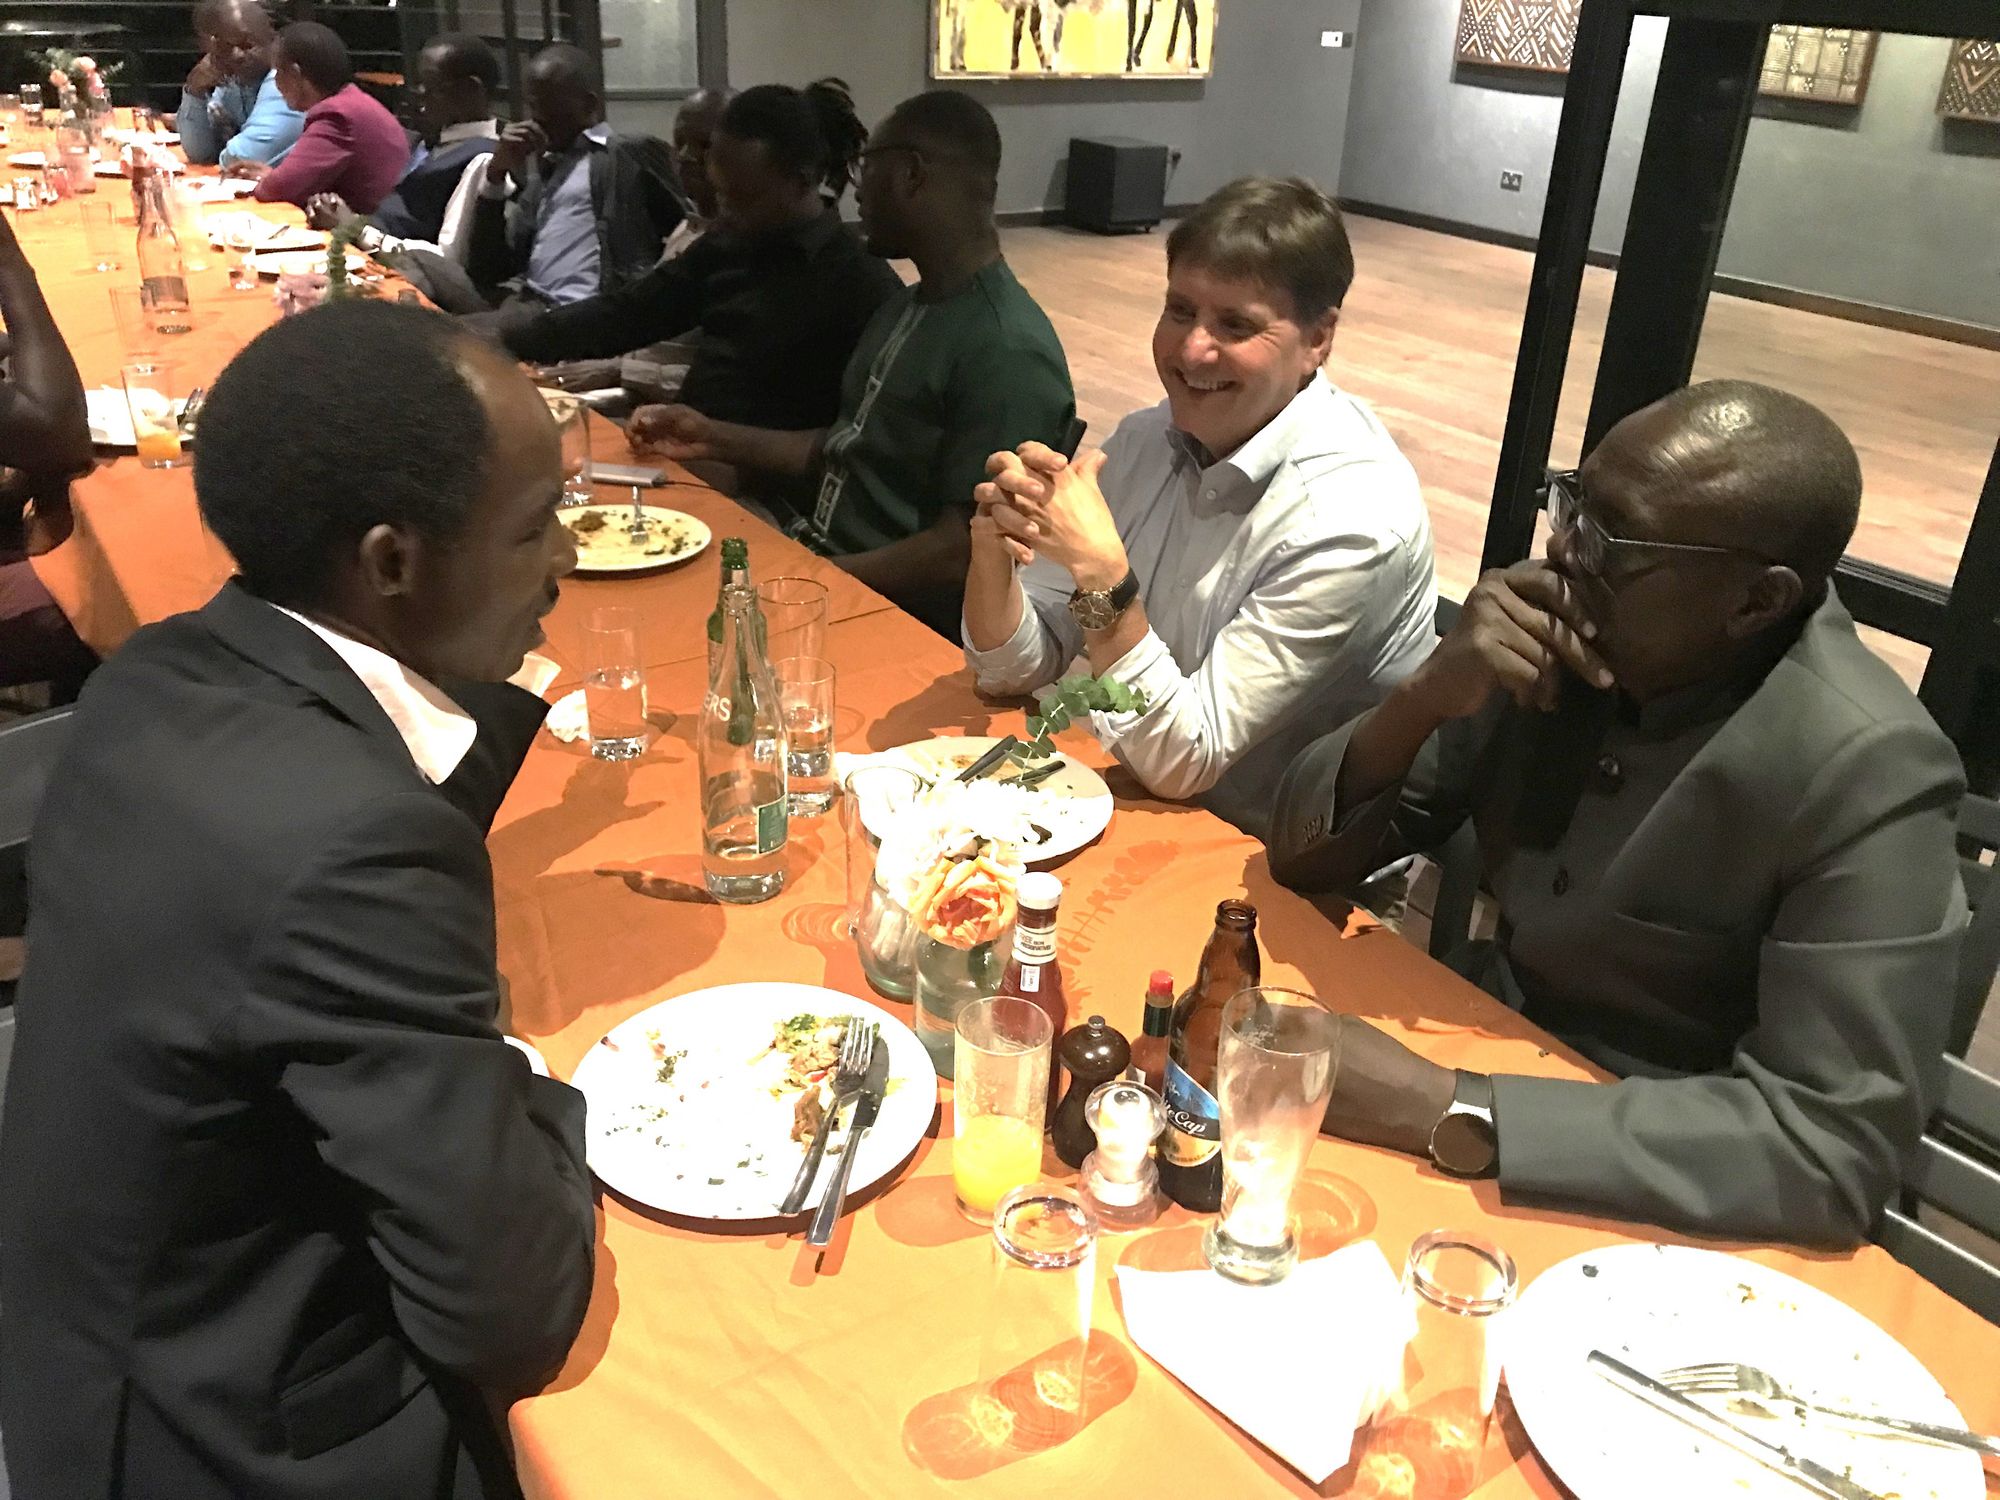 The participants connect during the networking dinner and share further experiences.